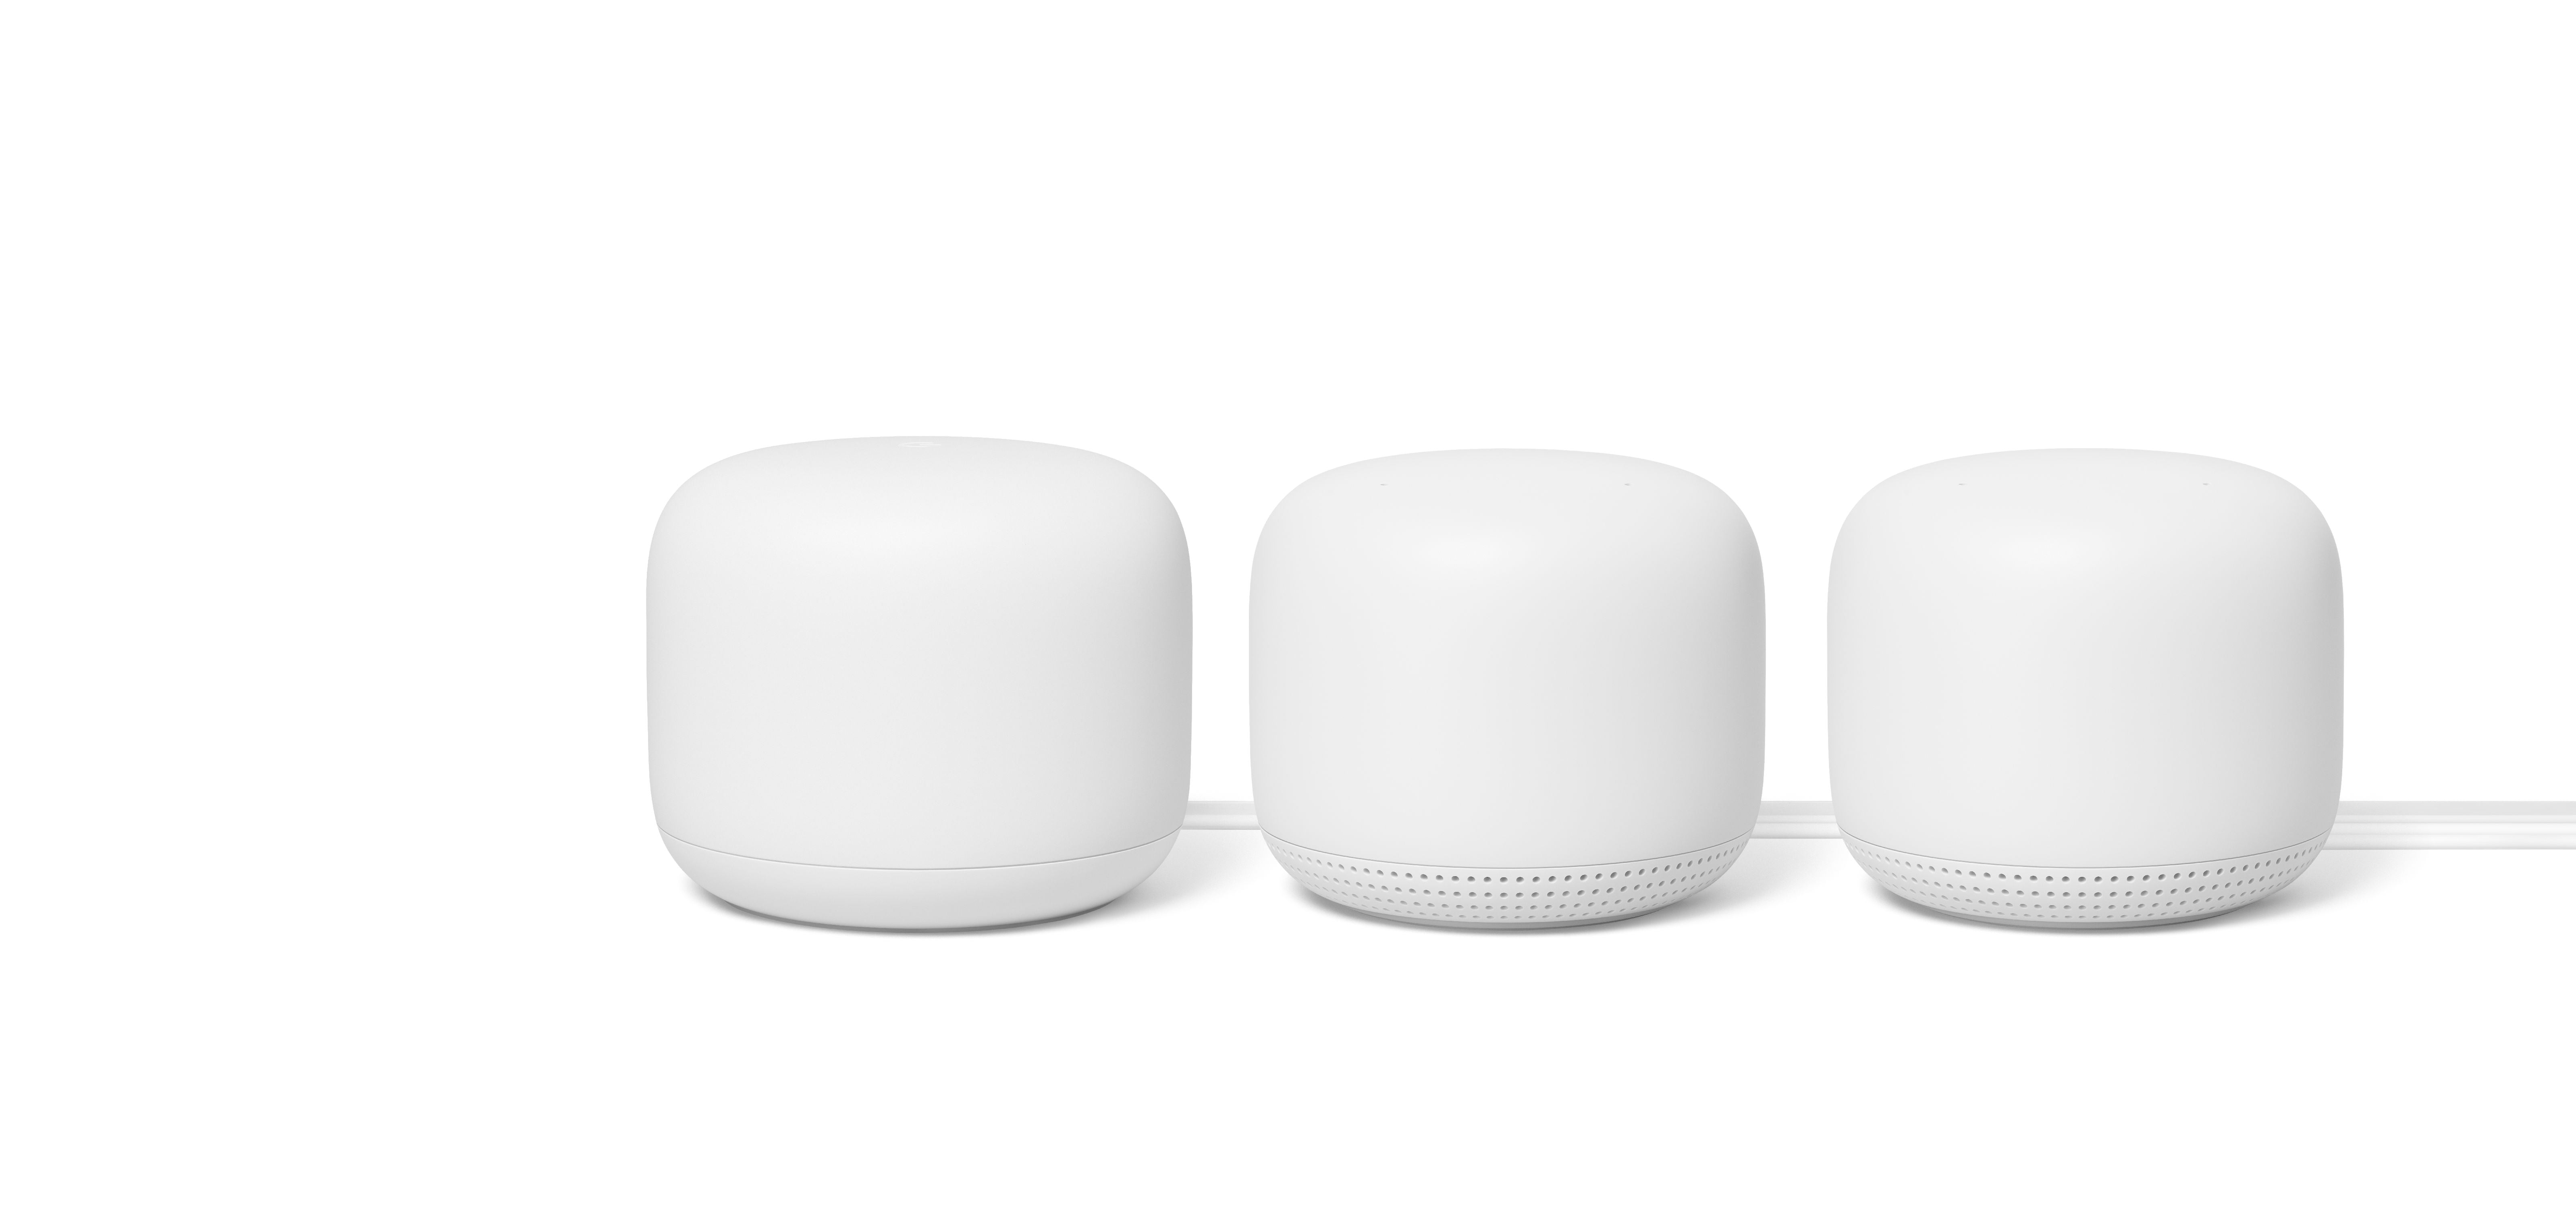 Google Nest Wifi 3 Pack (AC2200 Mesh Router with 2 Points)